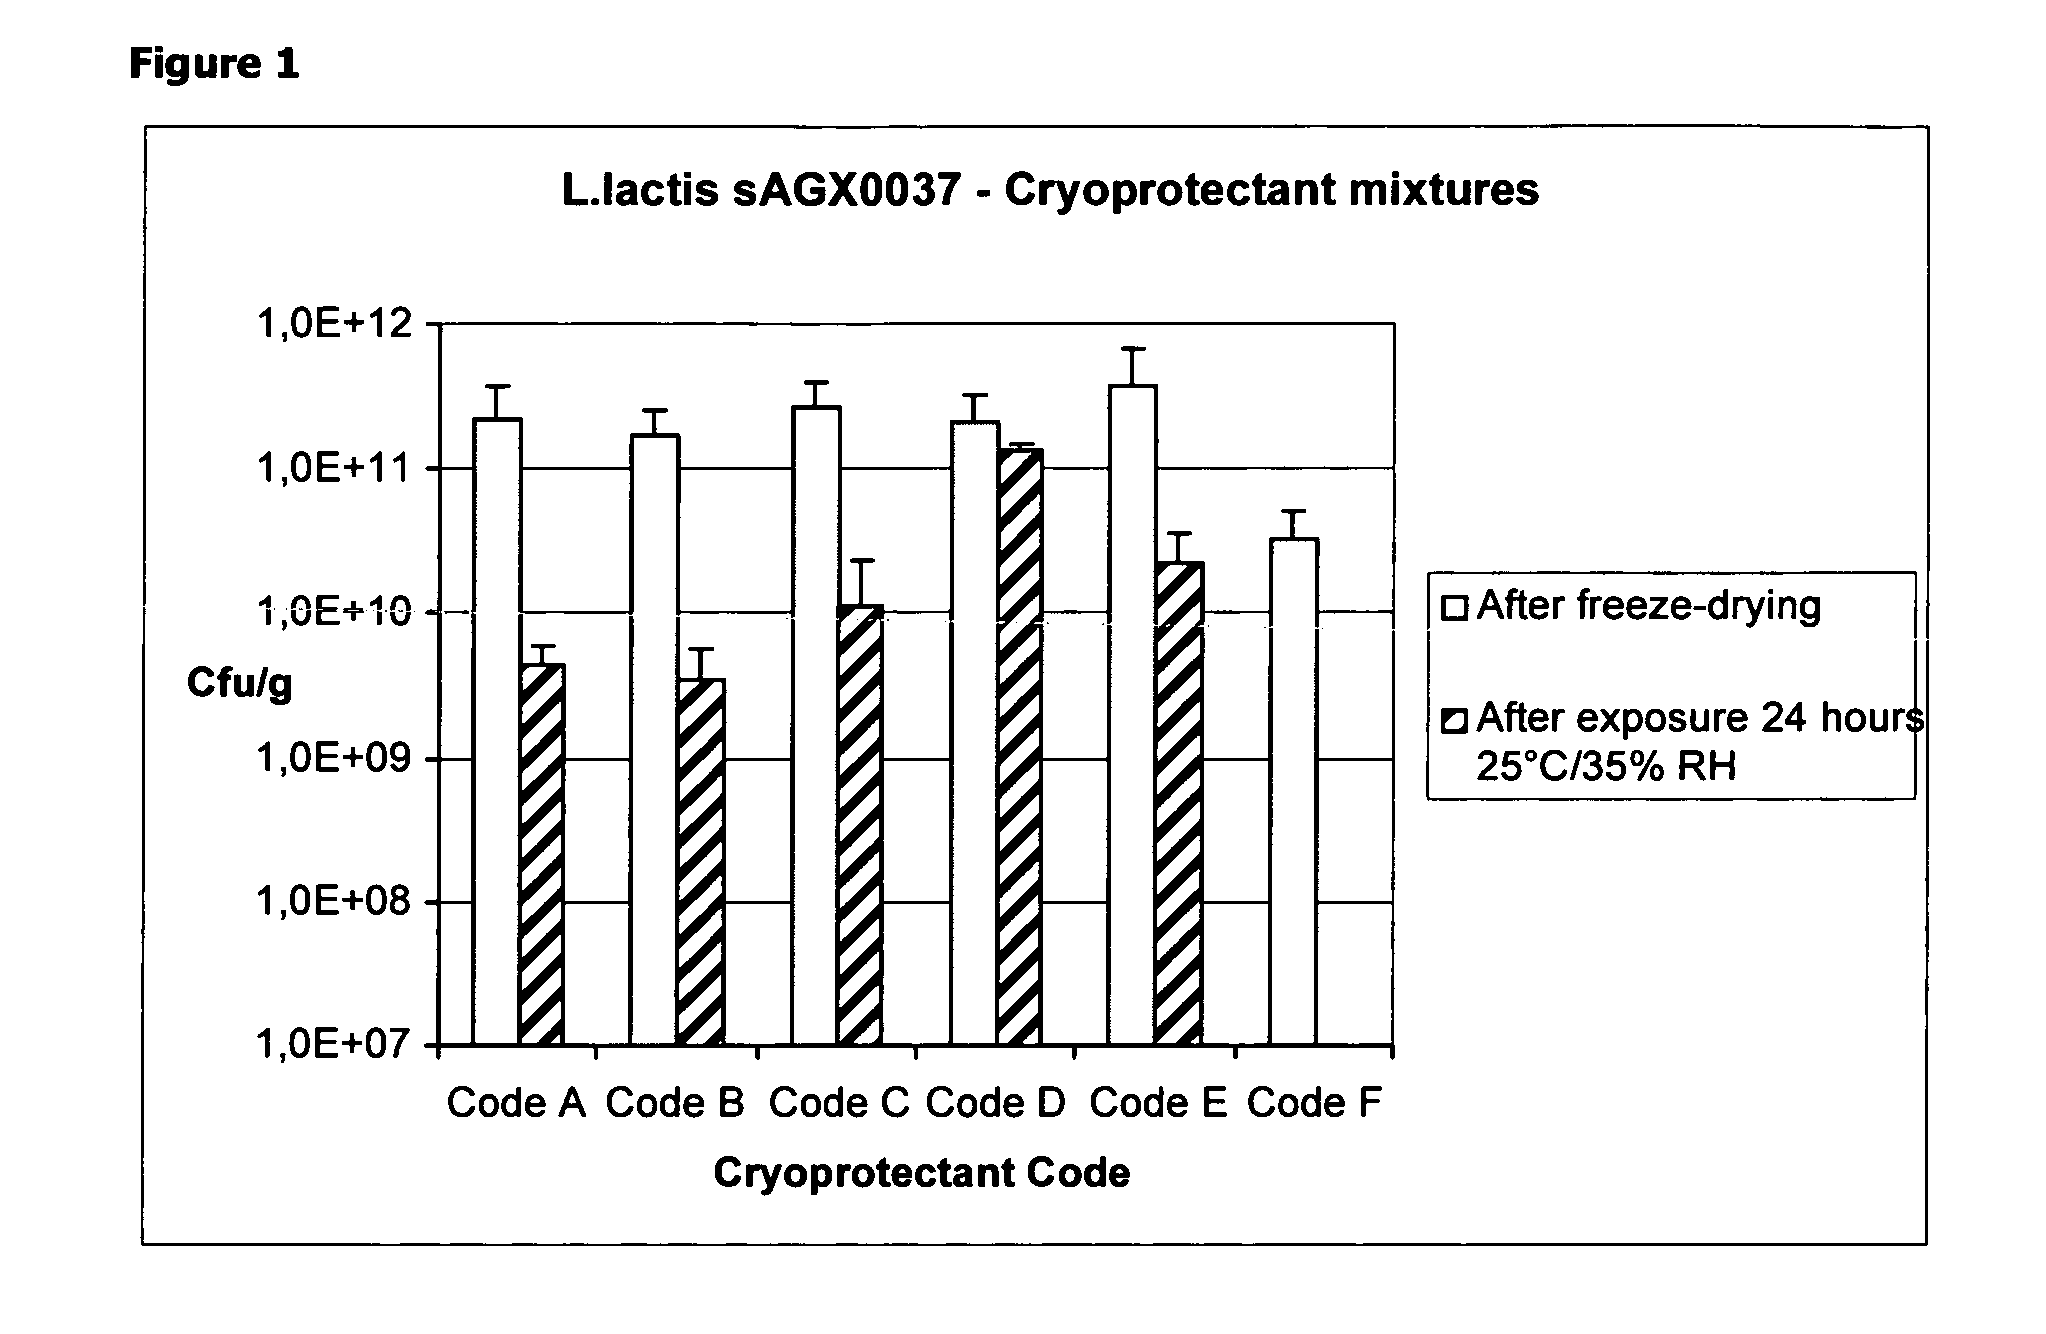 Cryoprotectants for freeze drying of lactic acid bacteria